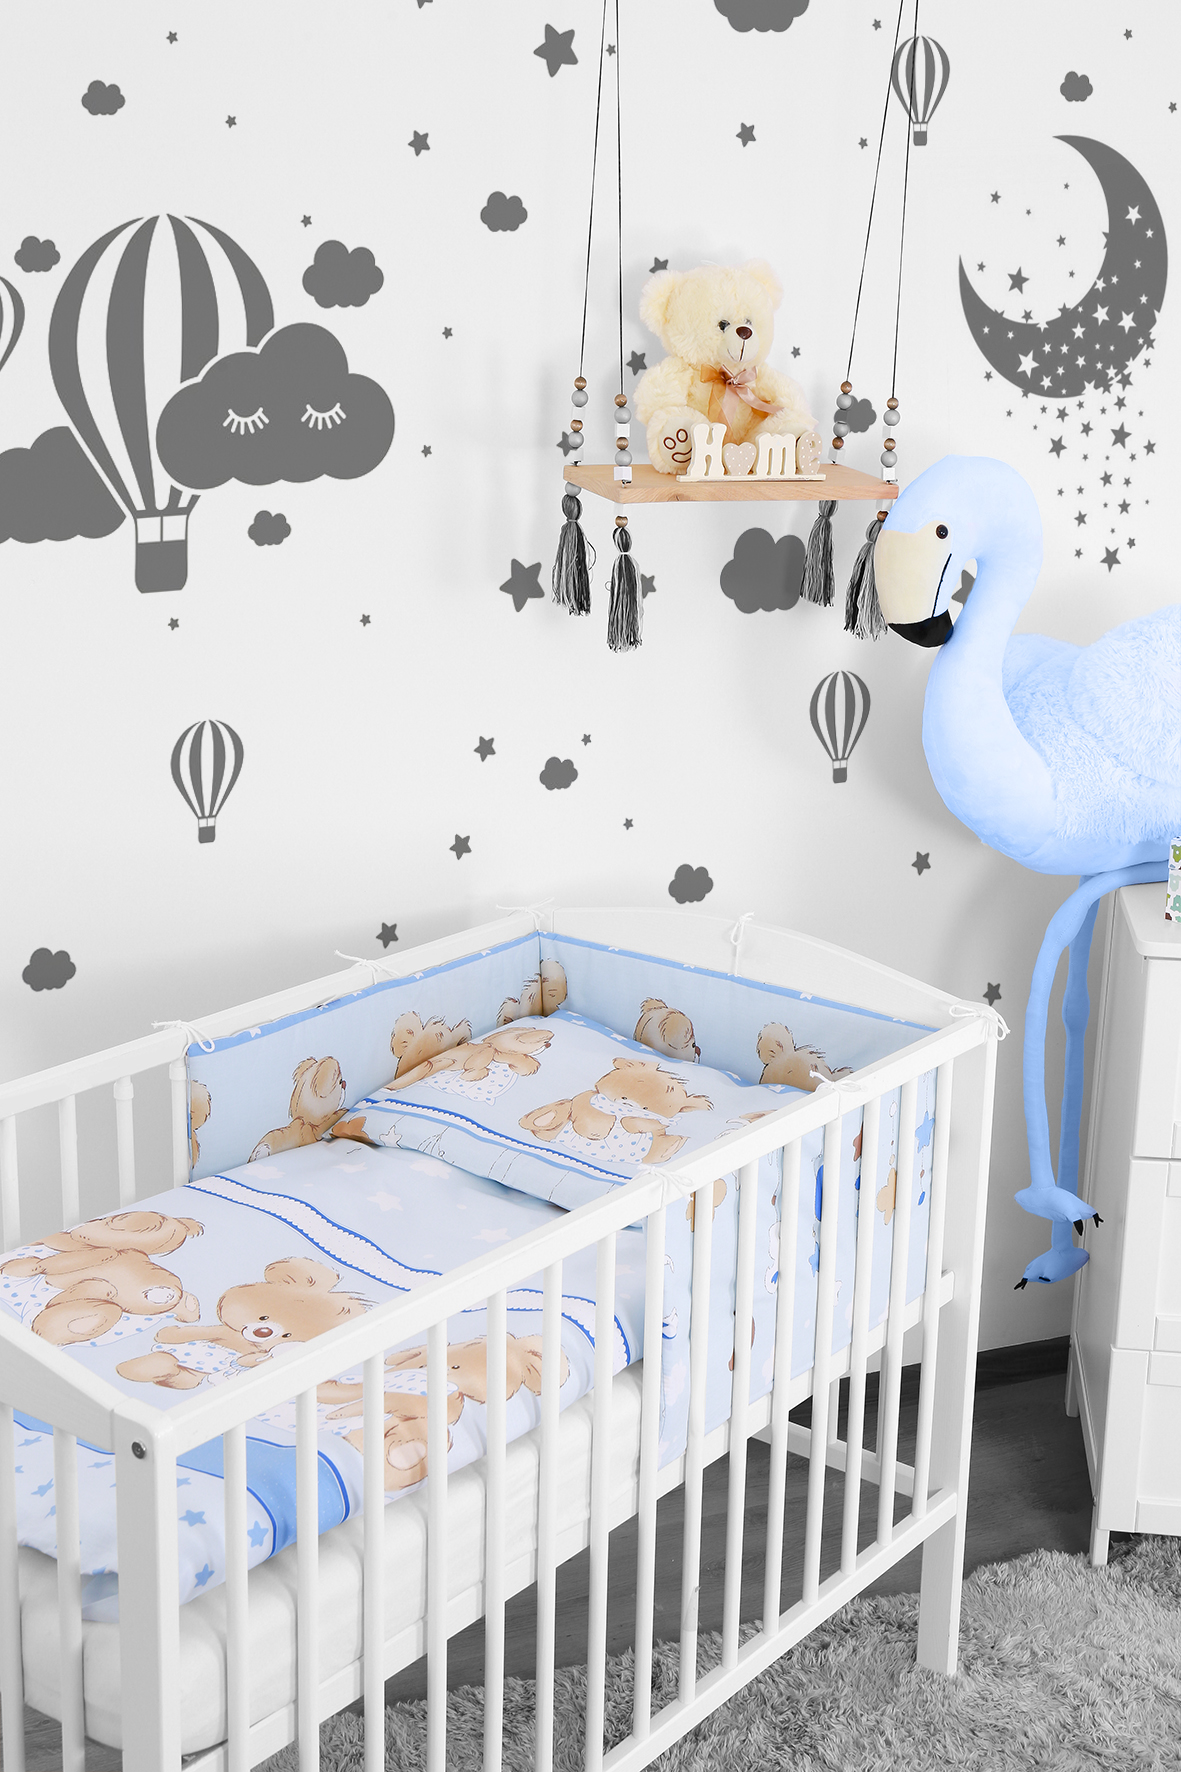 Grey-Elephant, COT Size-for Duvet 120X90 2 pc Baby Bedding Set for Cot 120X60 Or Cot Bed 140X70cm Inc Duvet Cover+Pillowcase